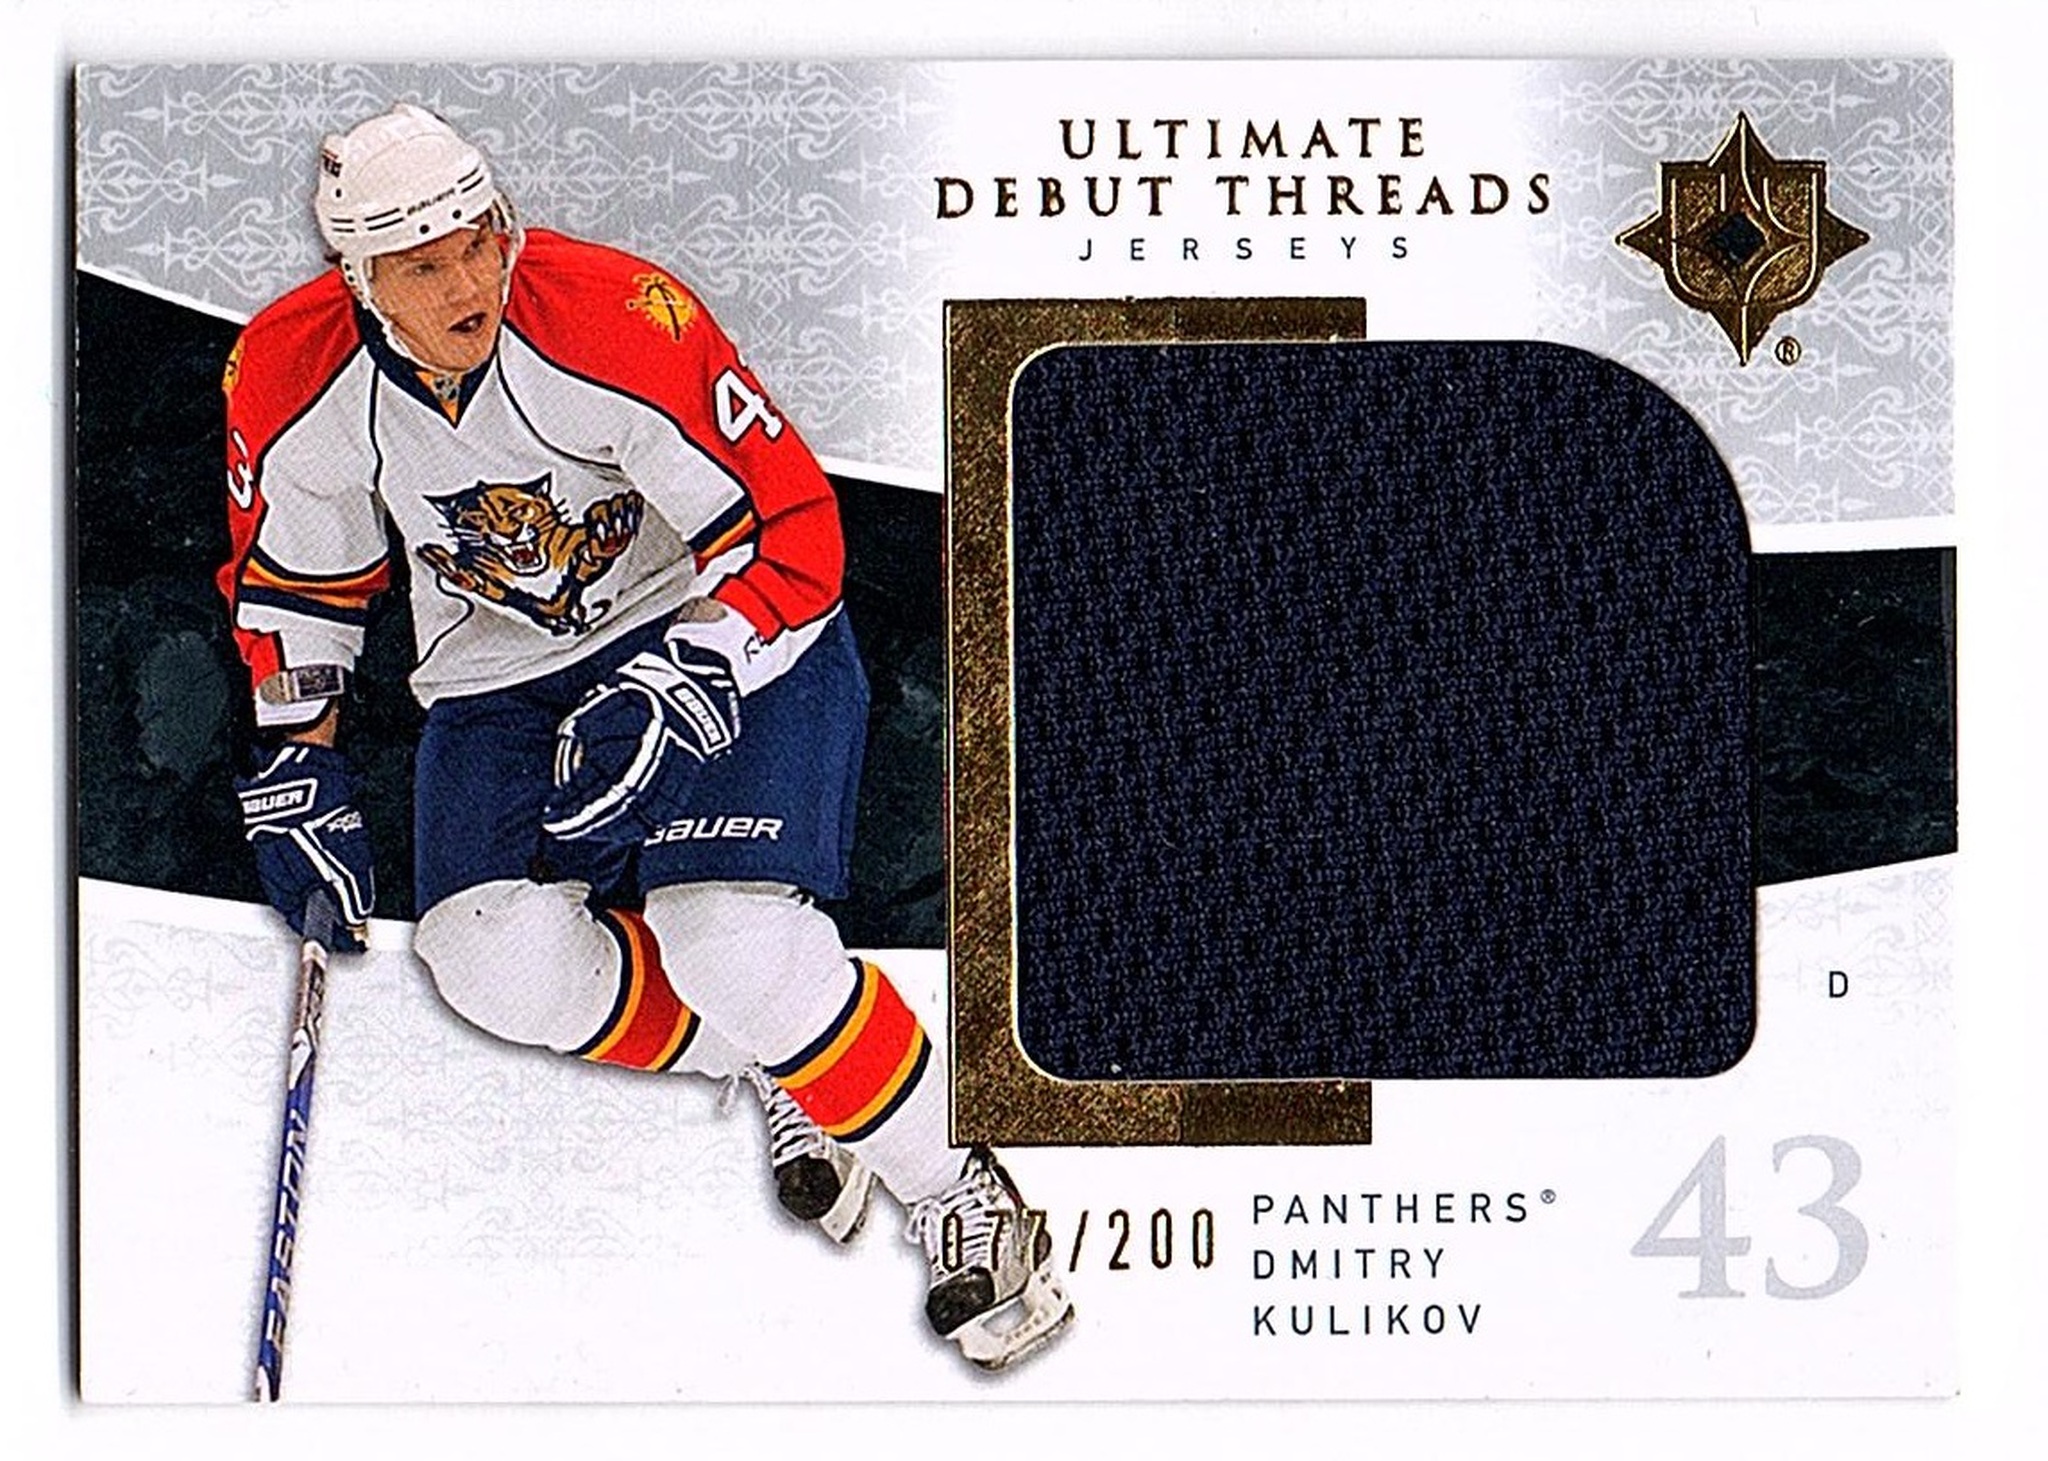 2009-10 Ultimate Collection Debut Threads #UDTDK Dmitry Kulikov (30-X2-NHLPANTHERS)